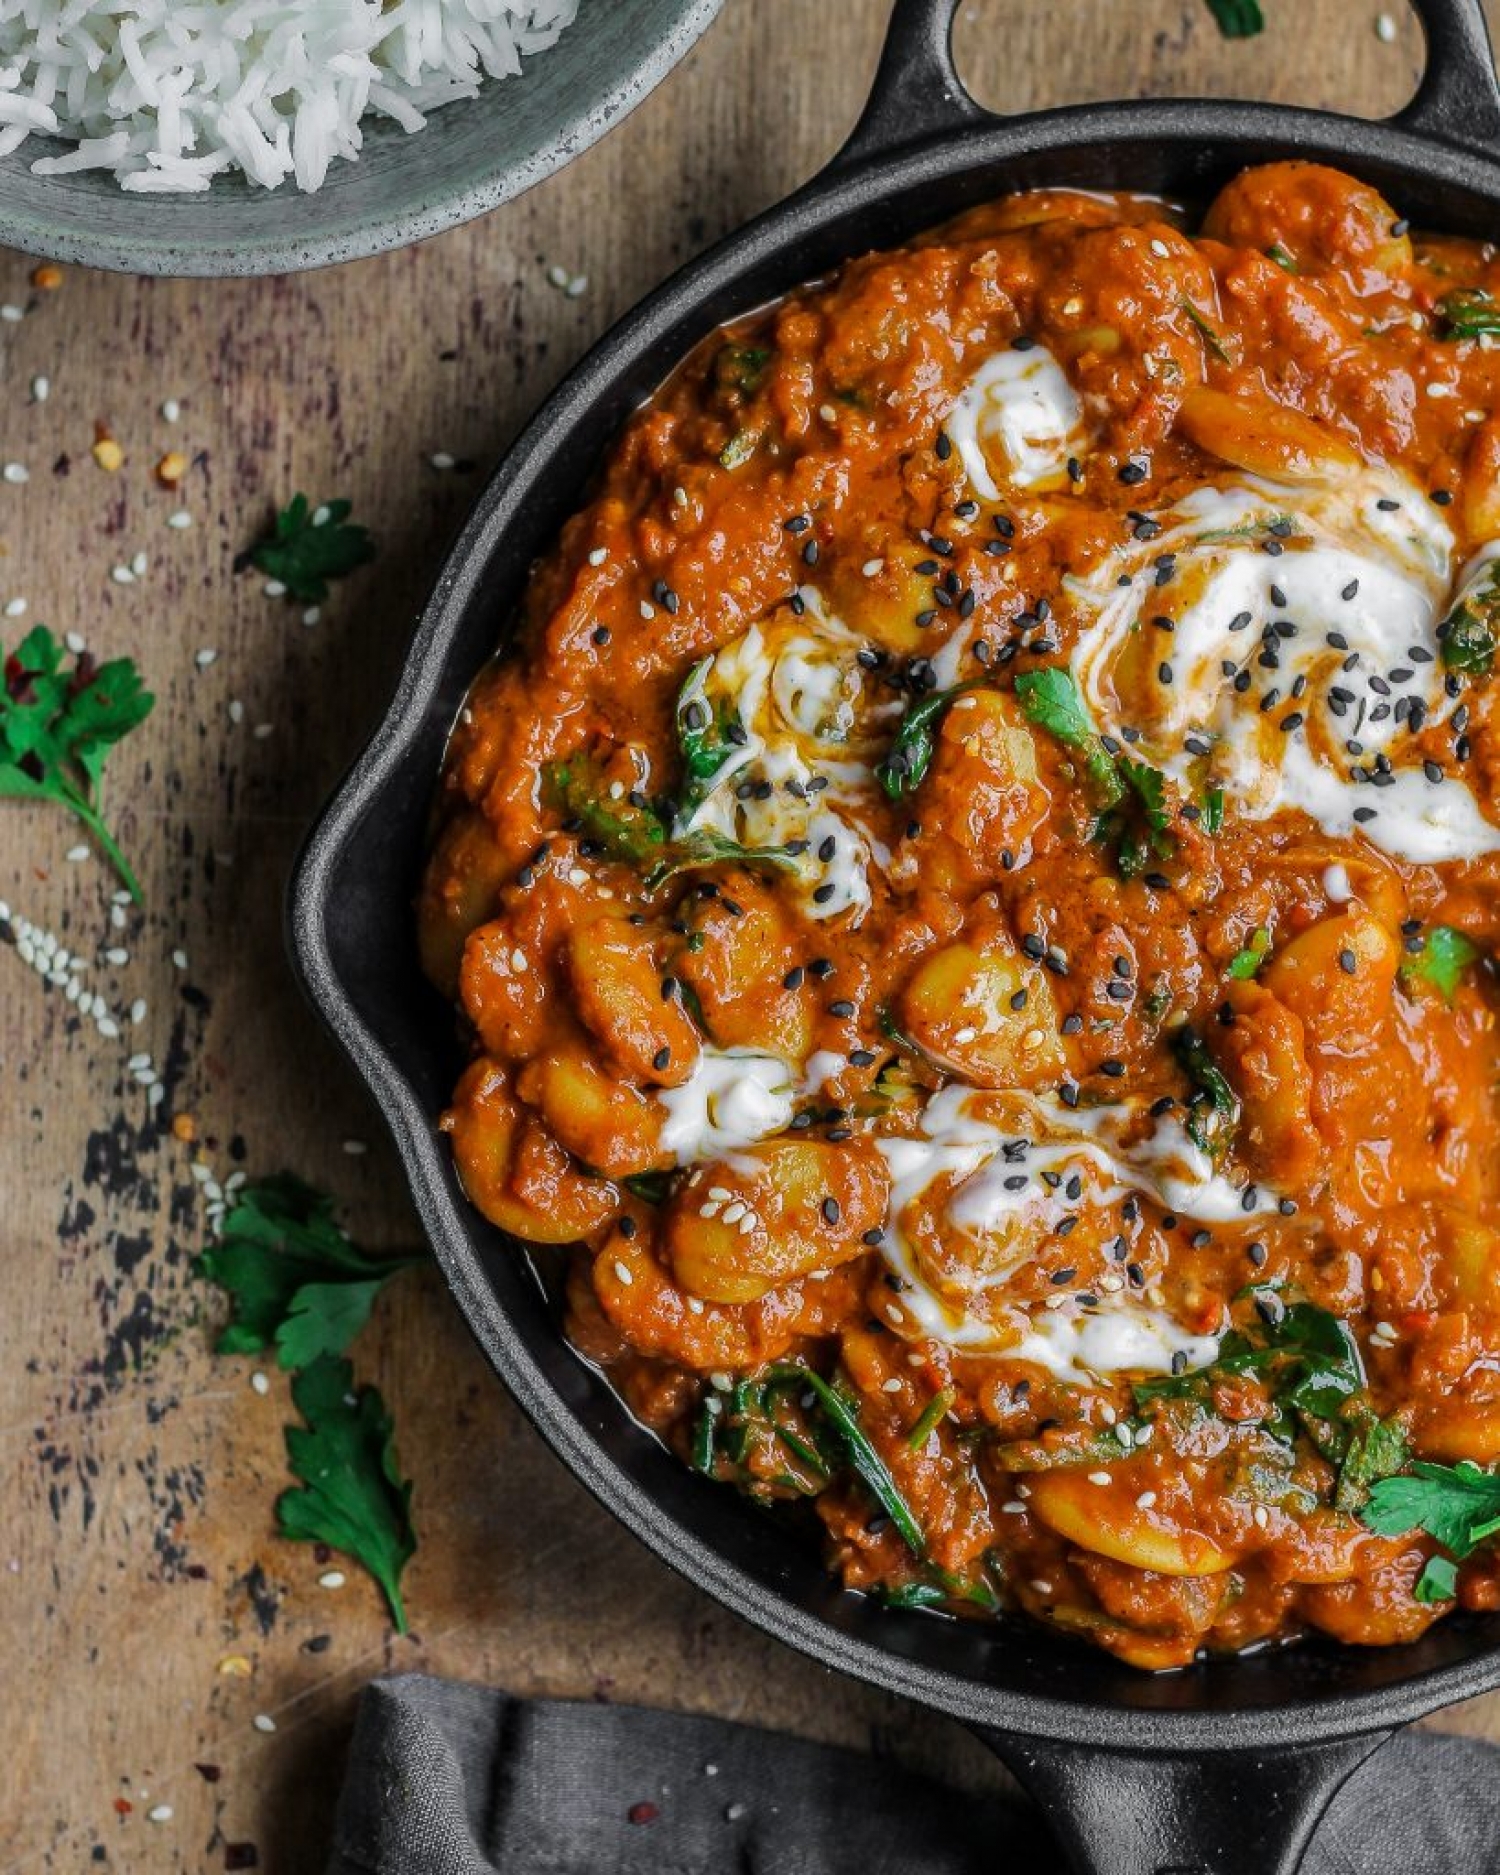 <p>This aromatic butter bean curry is brimming with good-for-you spices and wilted spinach. It includes a made-from-scratch curry paste that's a total cinch to make in the food processor, and it's one of those dishes that tastes even better the next day. <a href="https://www.happyskinkitchen.com/2019/11/20/butter-bean-coconut-curry/" rel="noopener">Get the recipe here.</a></p>